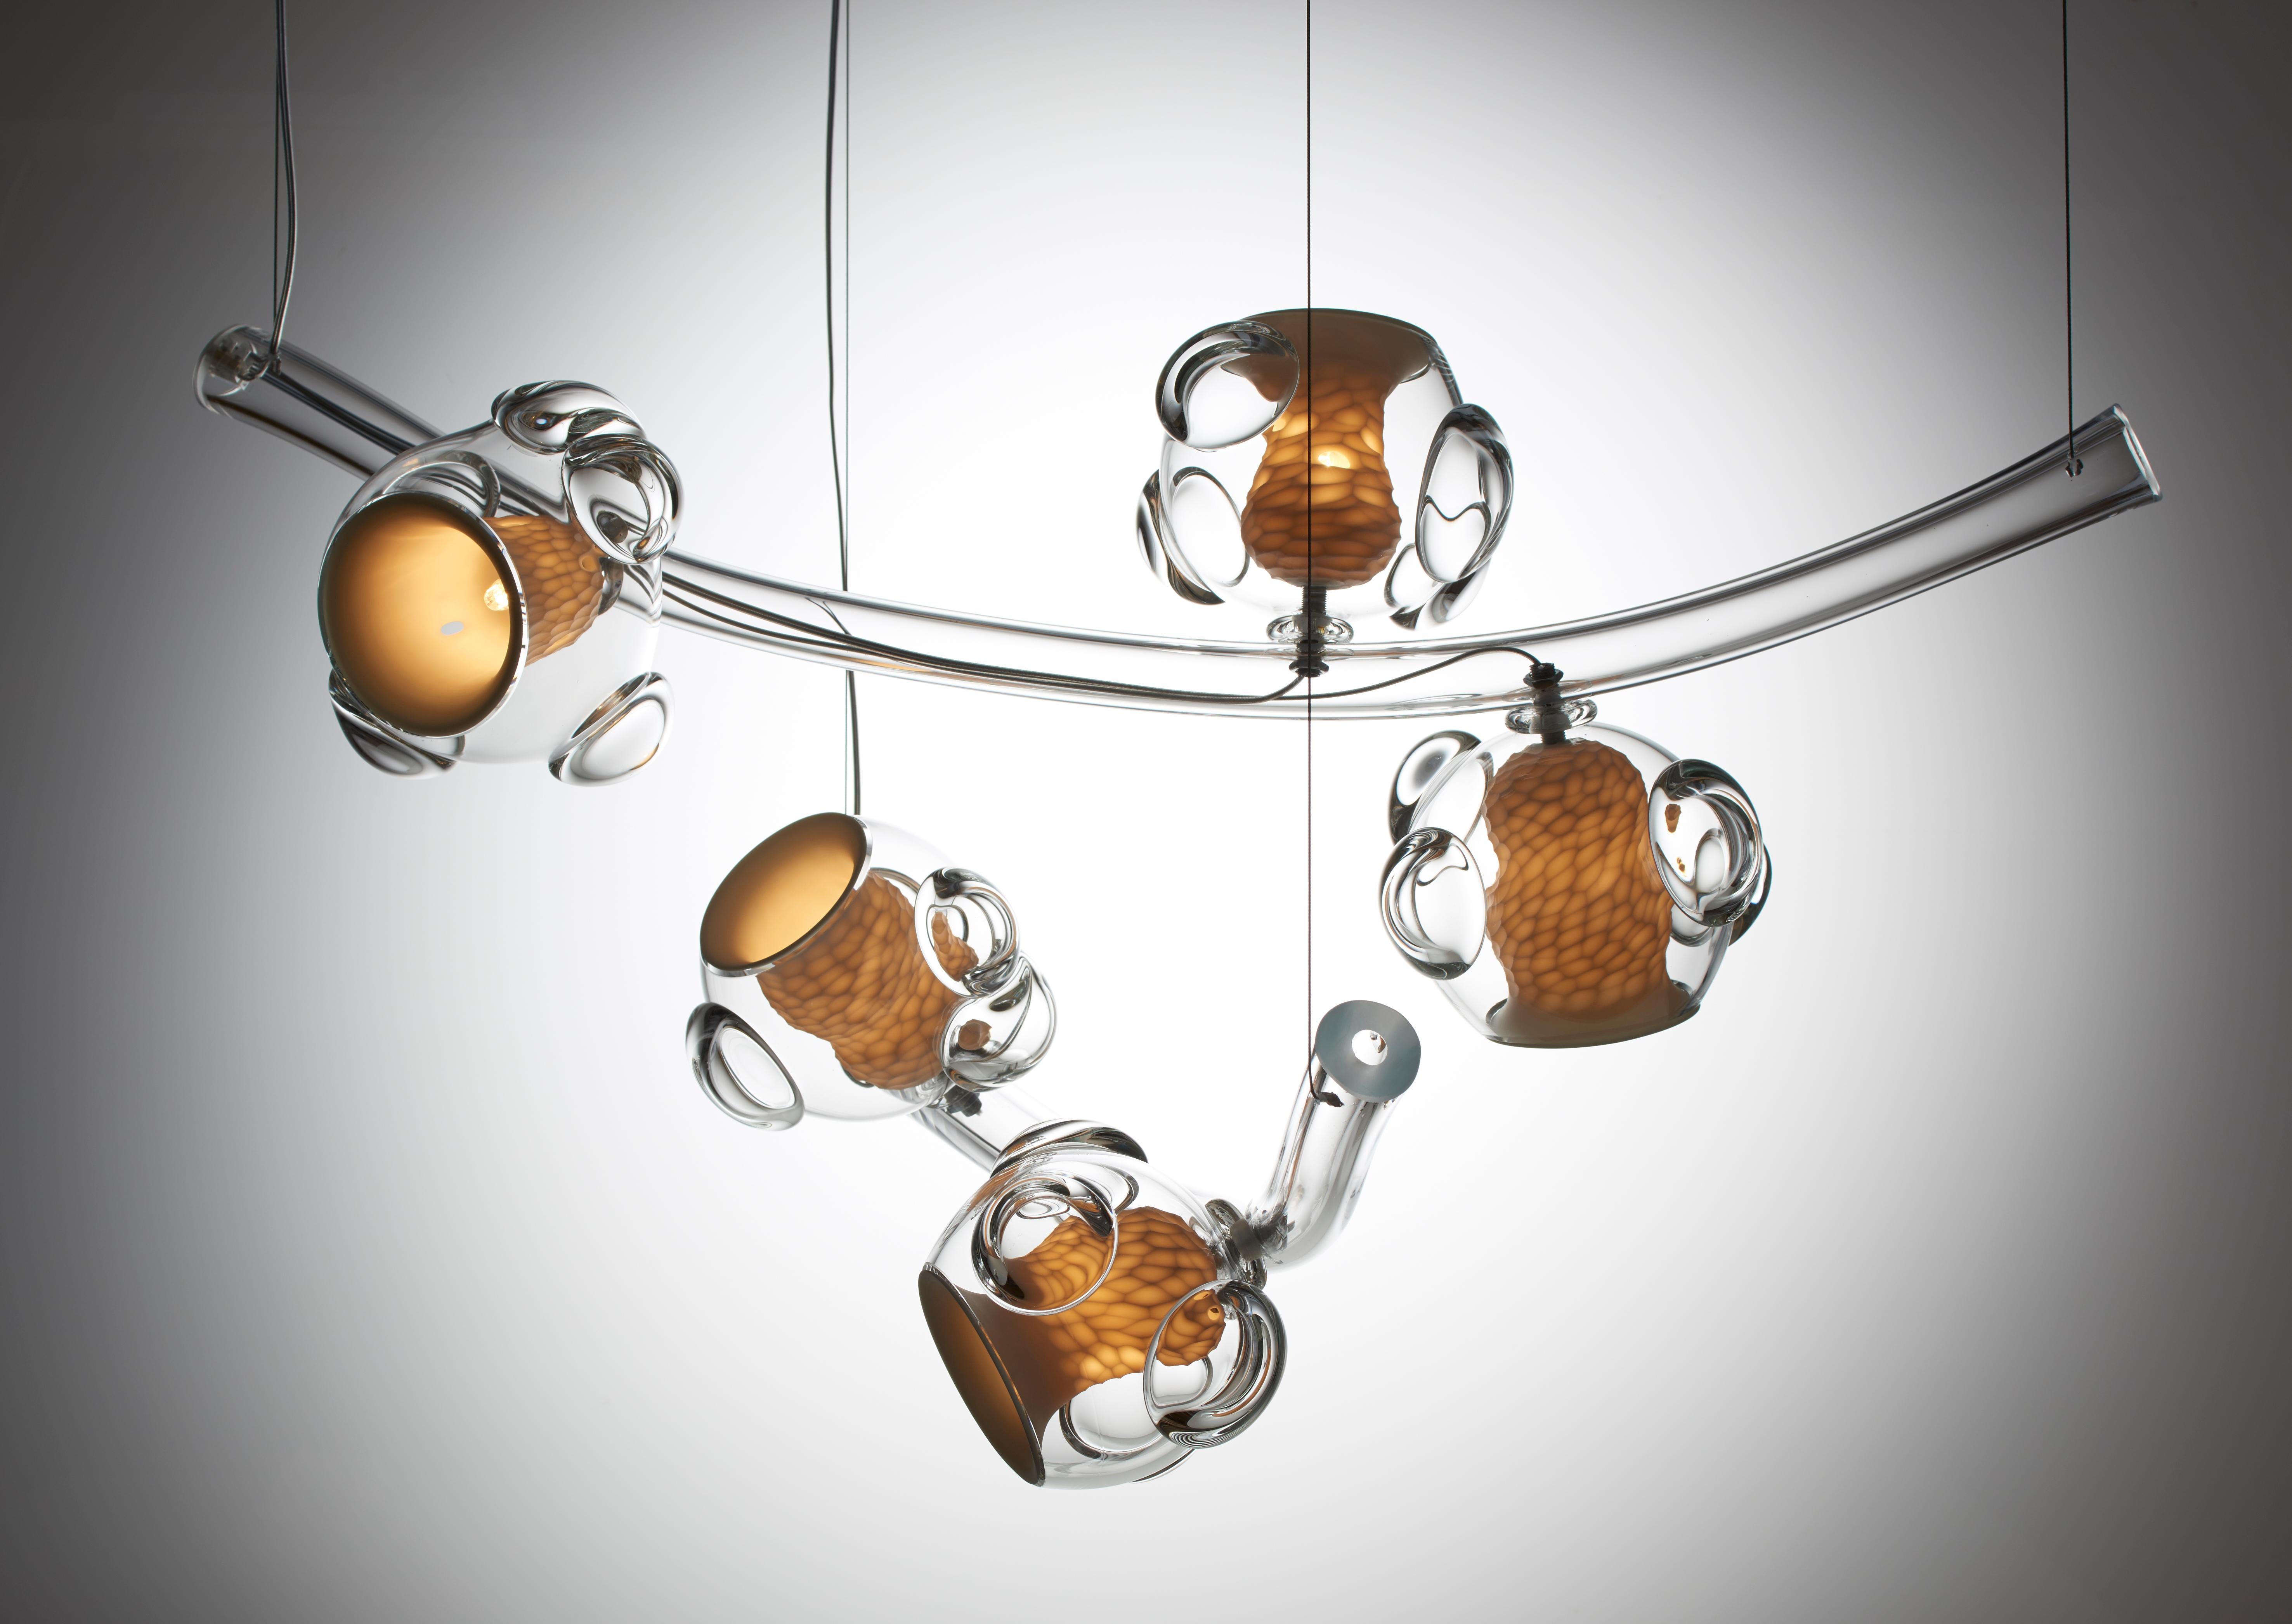 Forest of light chandelier by Vezzini & Chen
Dimensions: D70 x W30 X H55 cm
Materials: Porcelain, glass, brushed stainless steel fitting, stainless steel , clear 2 core cable , LED G9 light bulb.
Also Available: Composition and number of lights